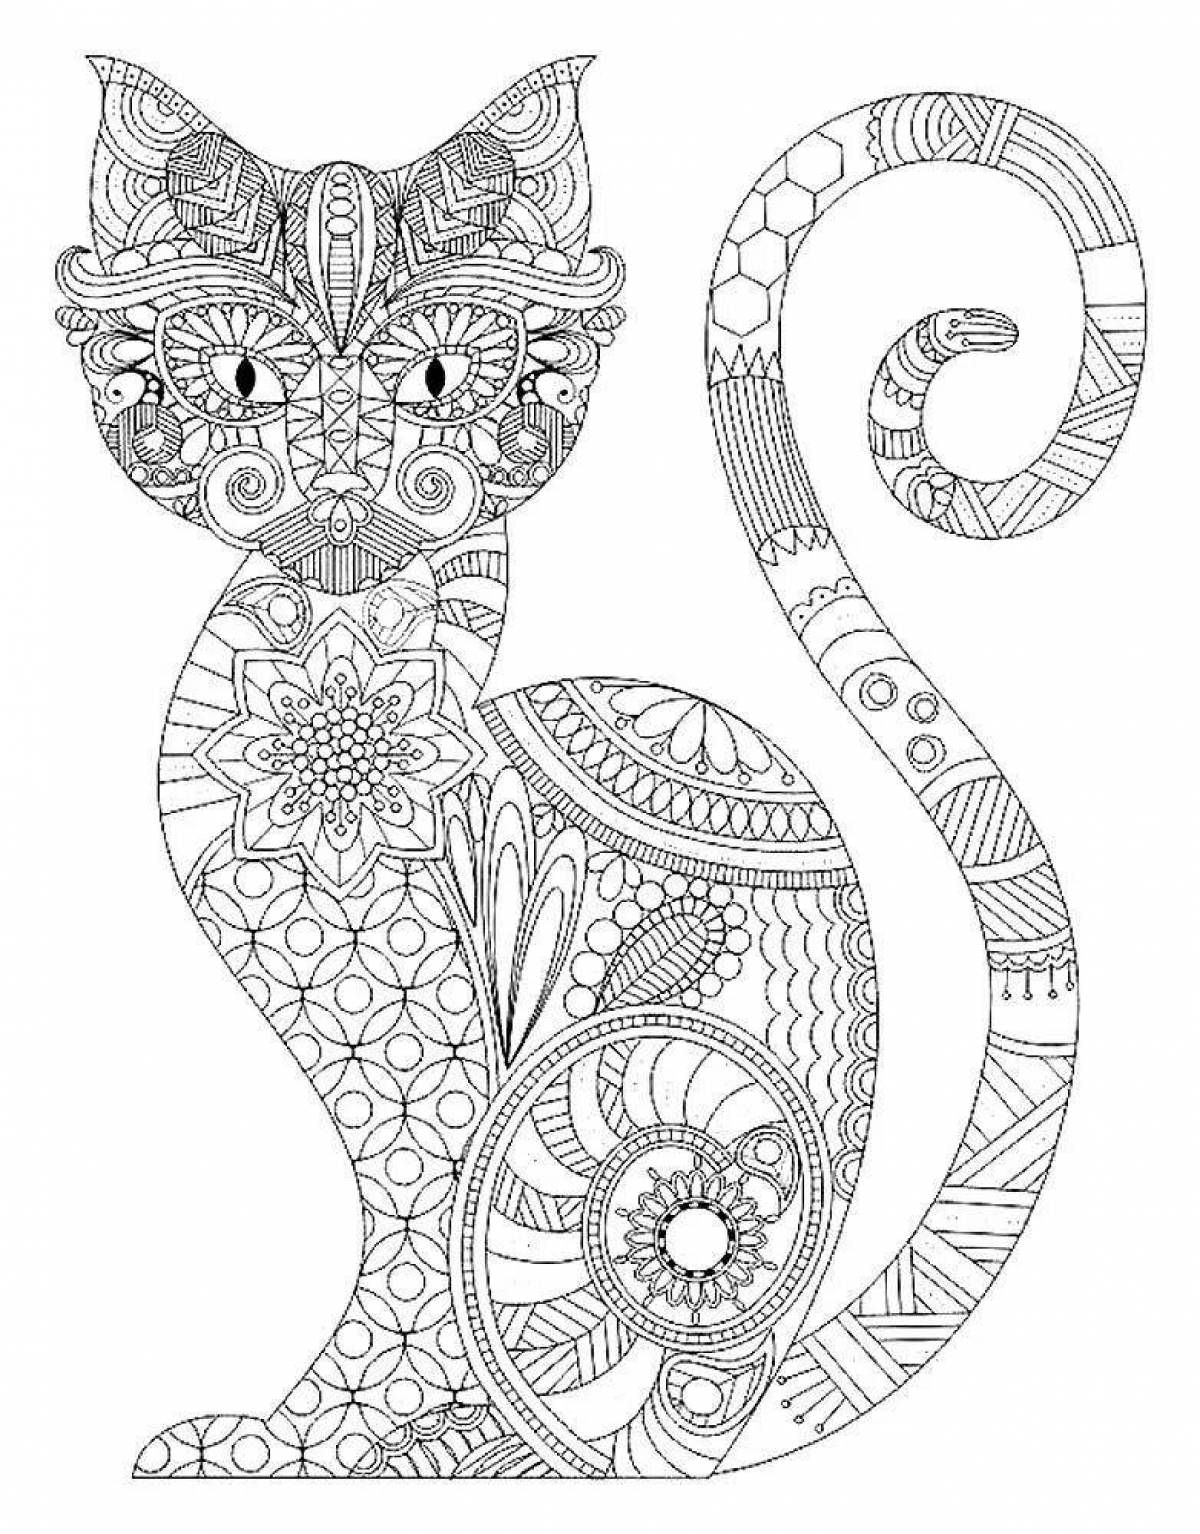 Coloring book inspiring cat therapy antistress